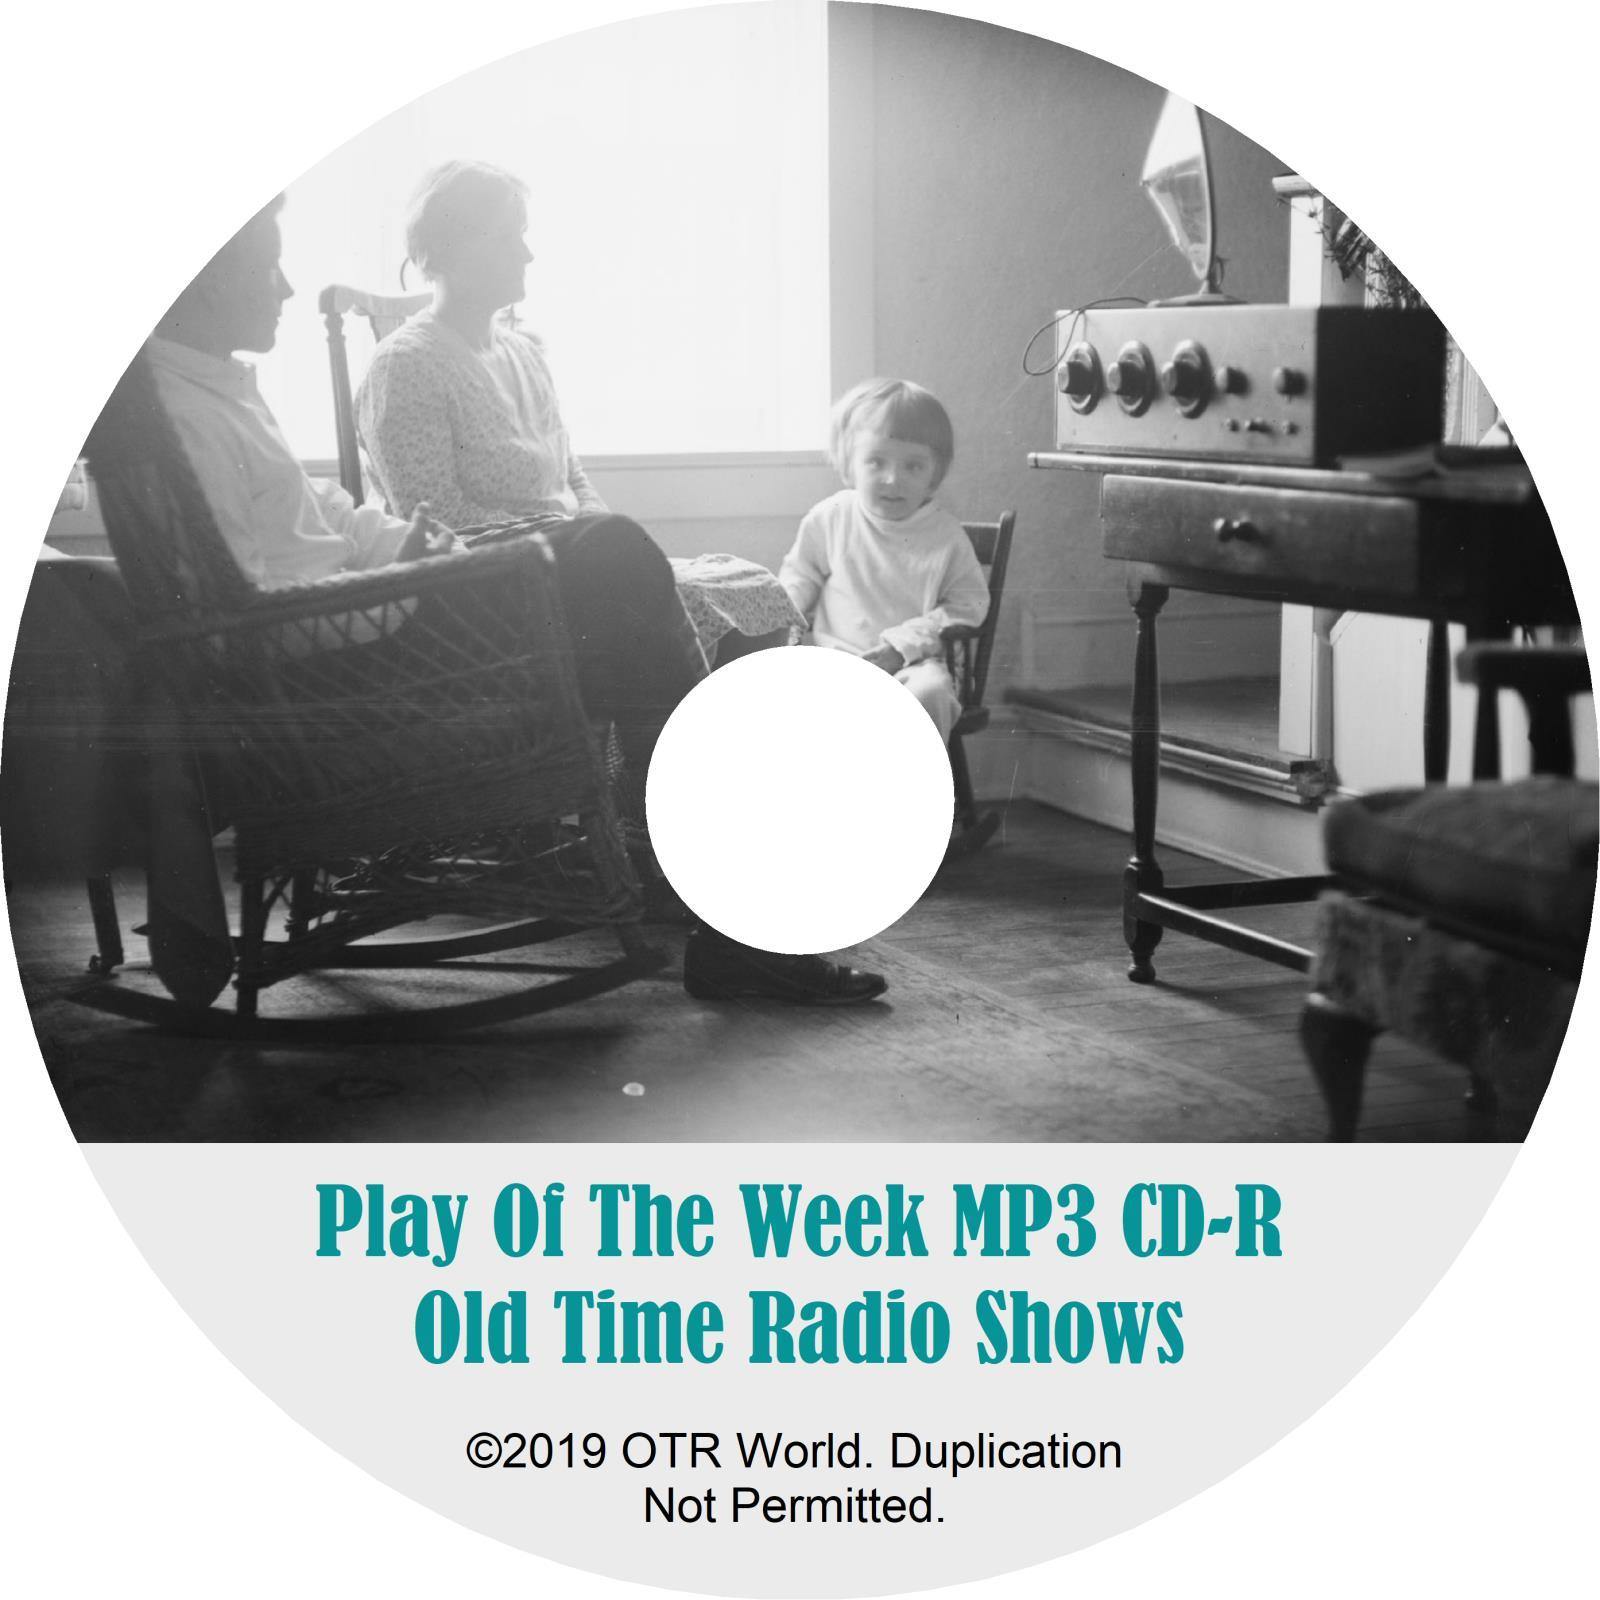 Play Of the Week OTR Old Time Radio Shows MP3 On CD 9 Episodes - OTR World